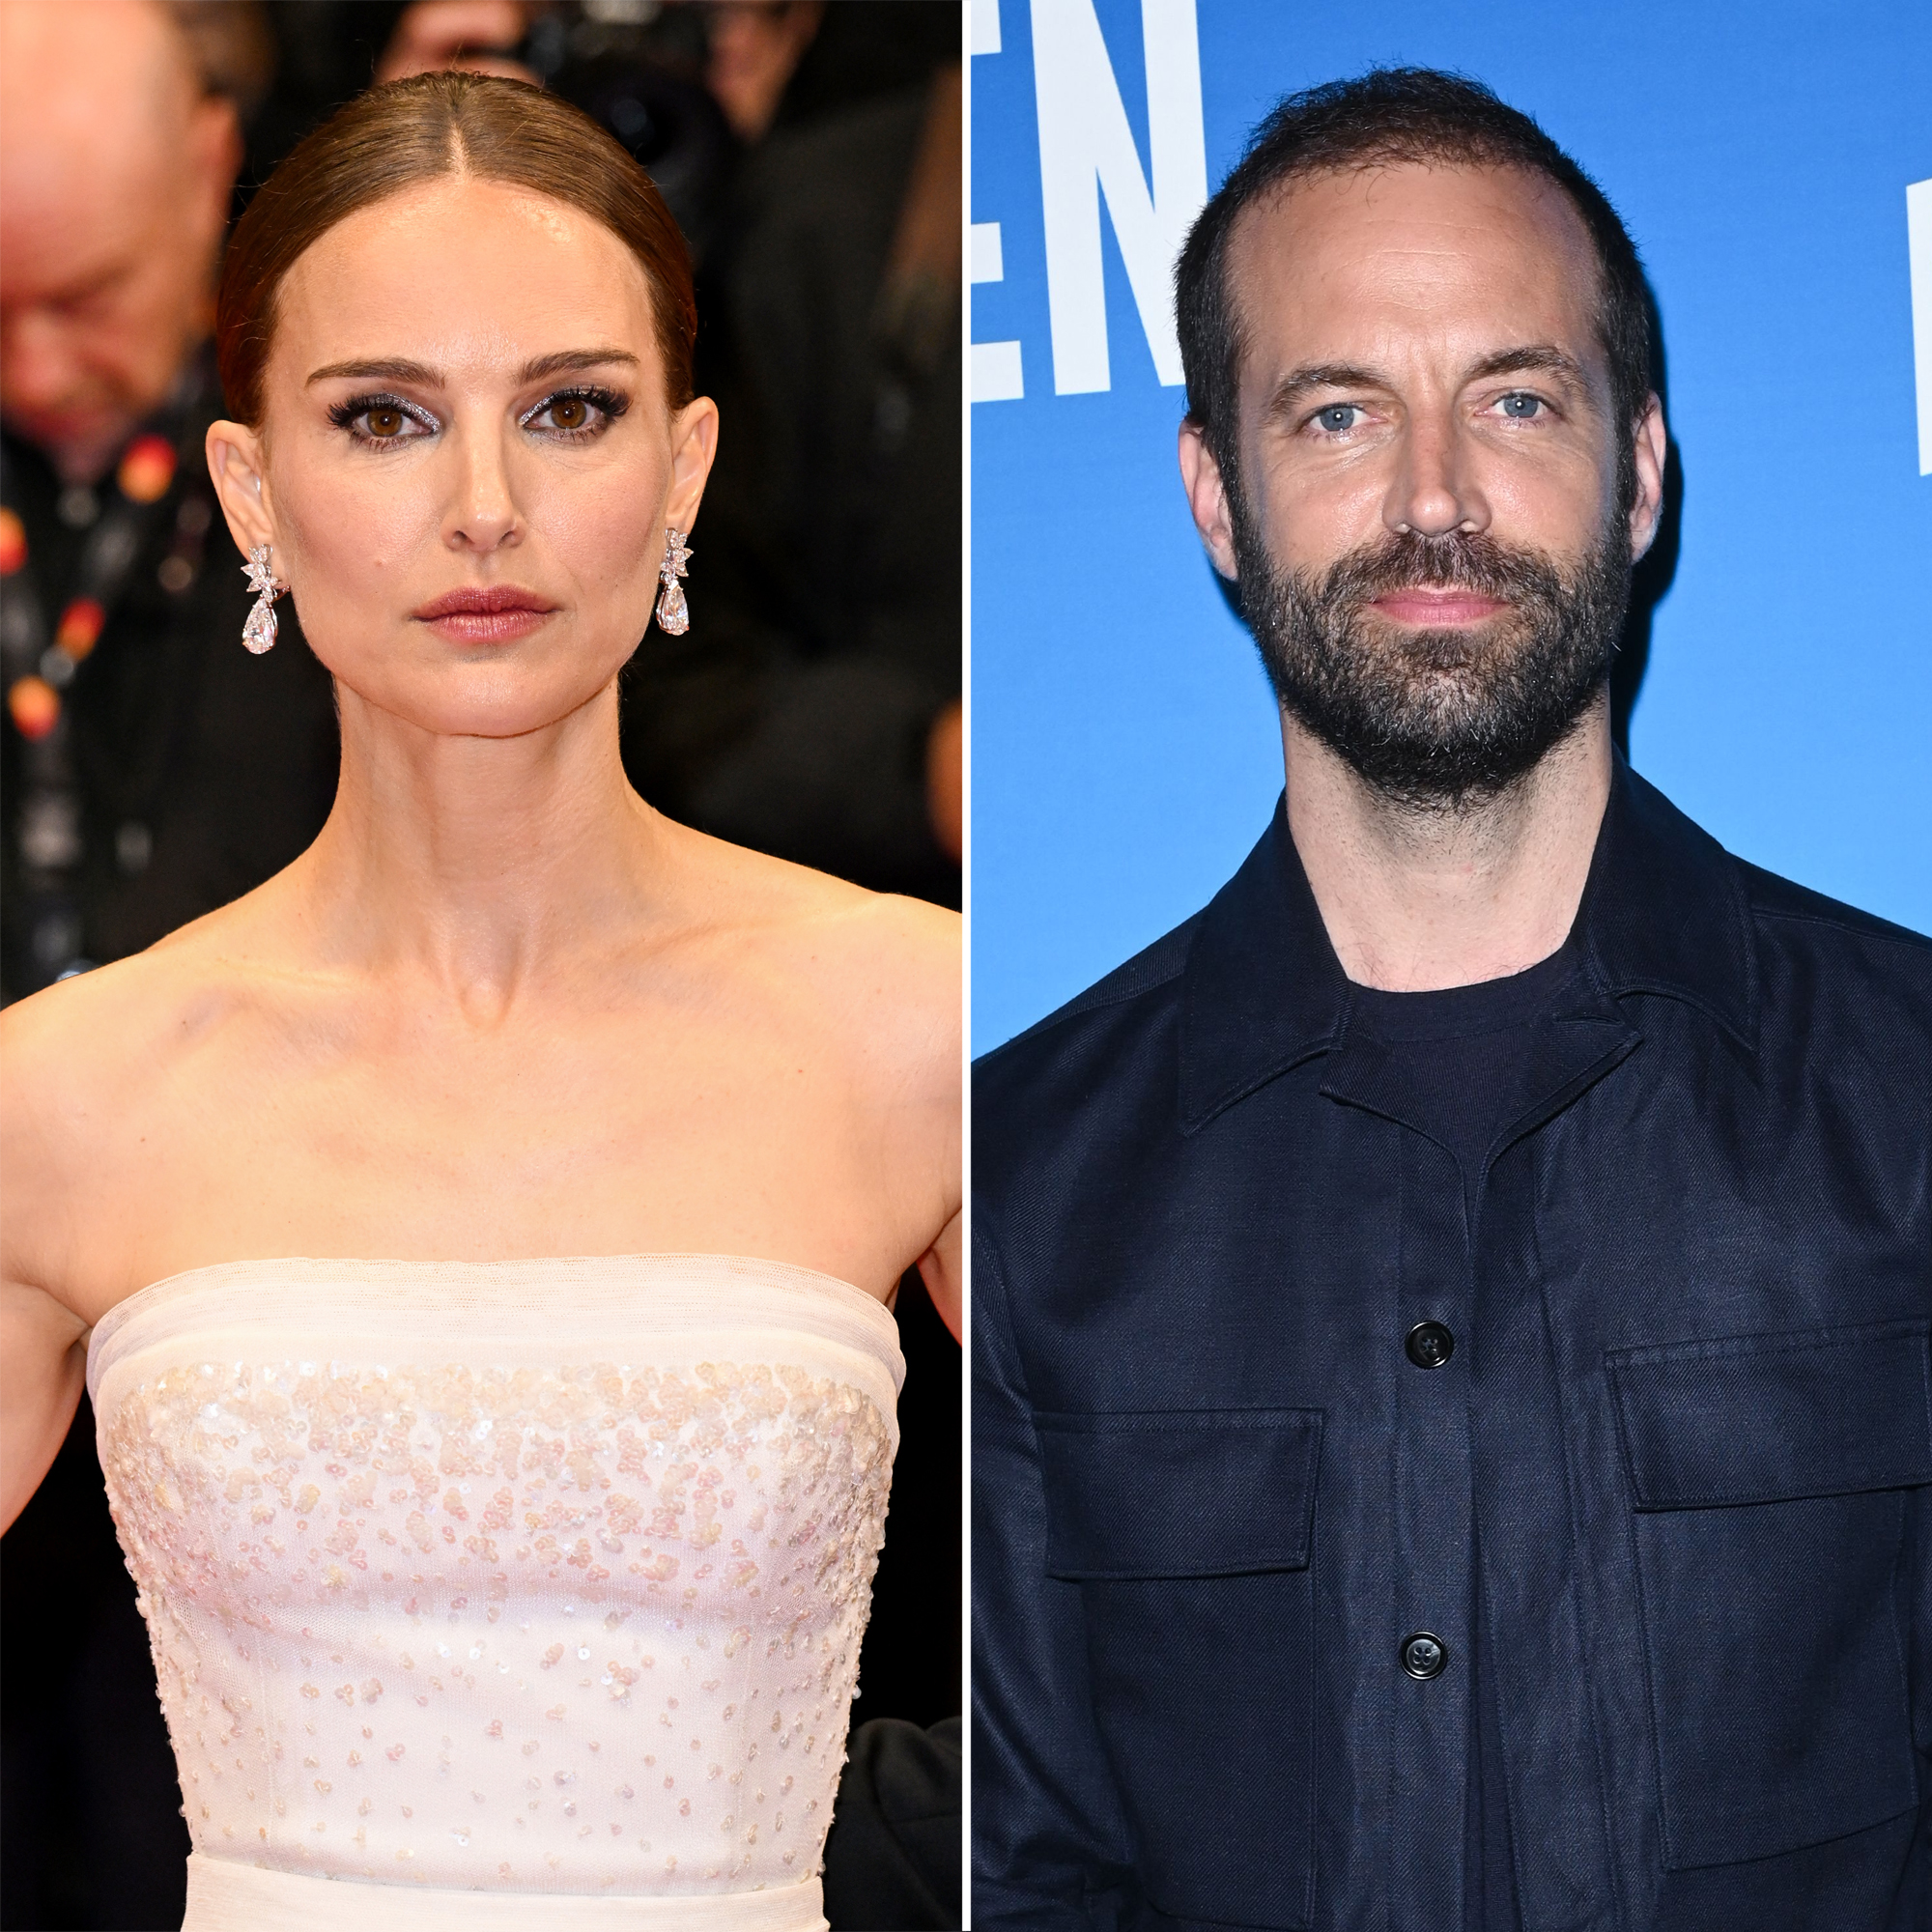 Natalie Portman and Benjamin Millepied Are Separated After Affair